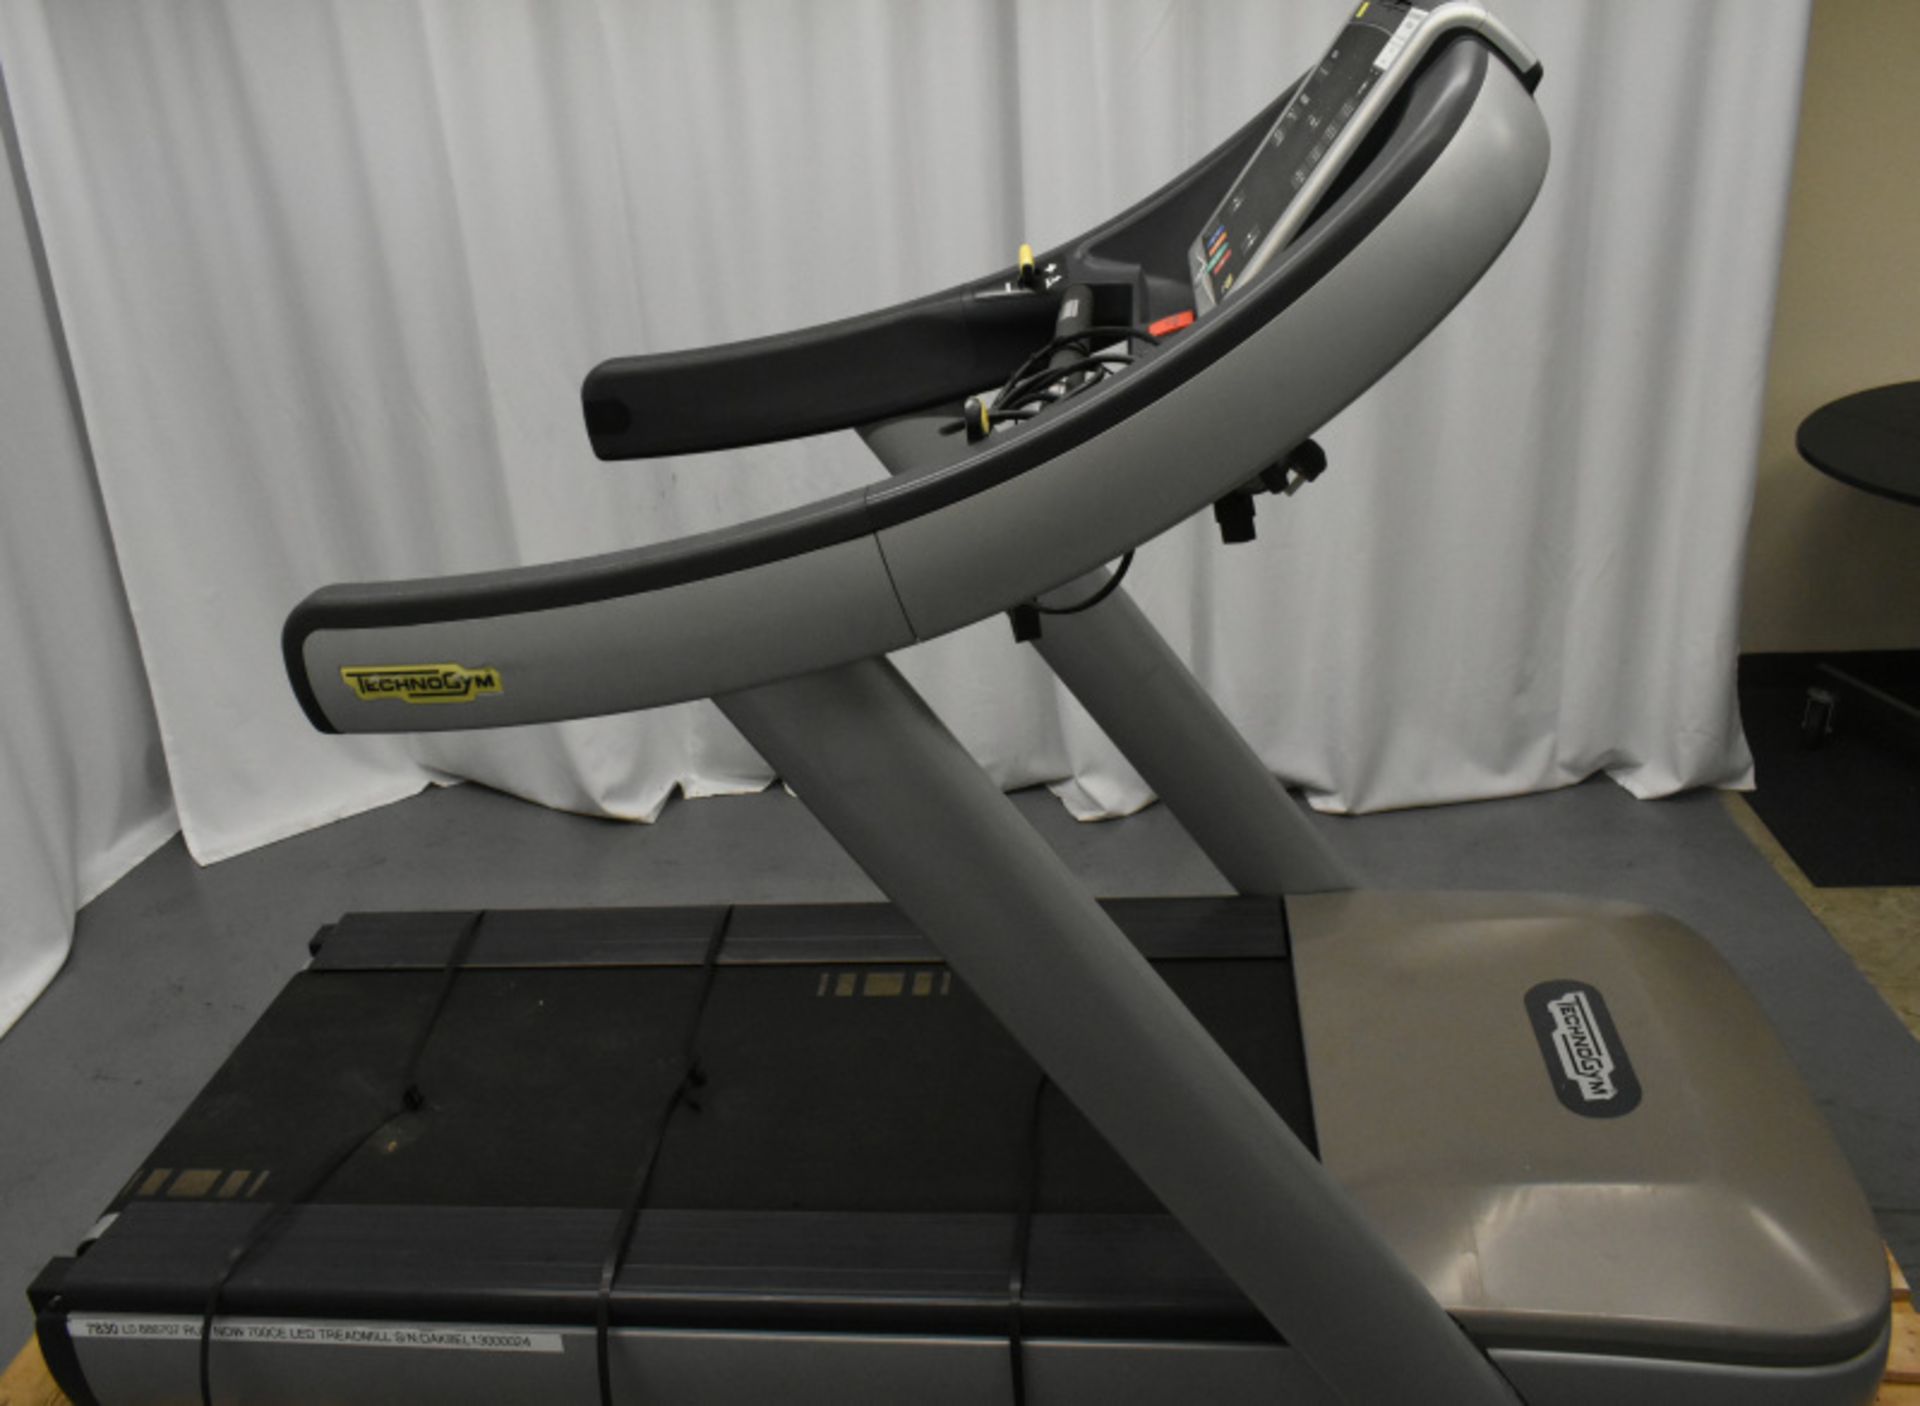 Technogym Treadmill - Please check pictures for overall condition - Image 2 of 9